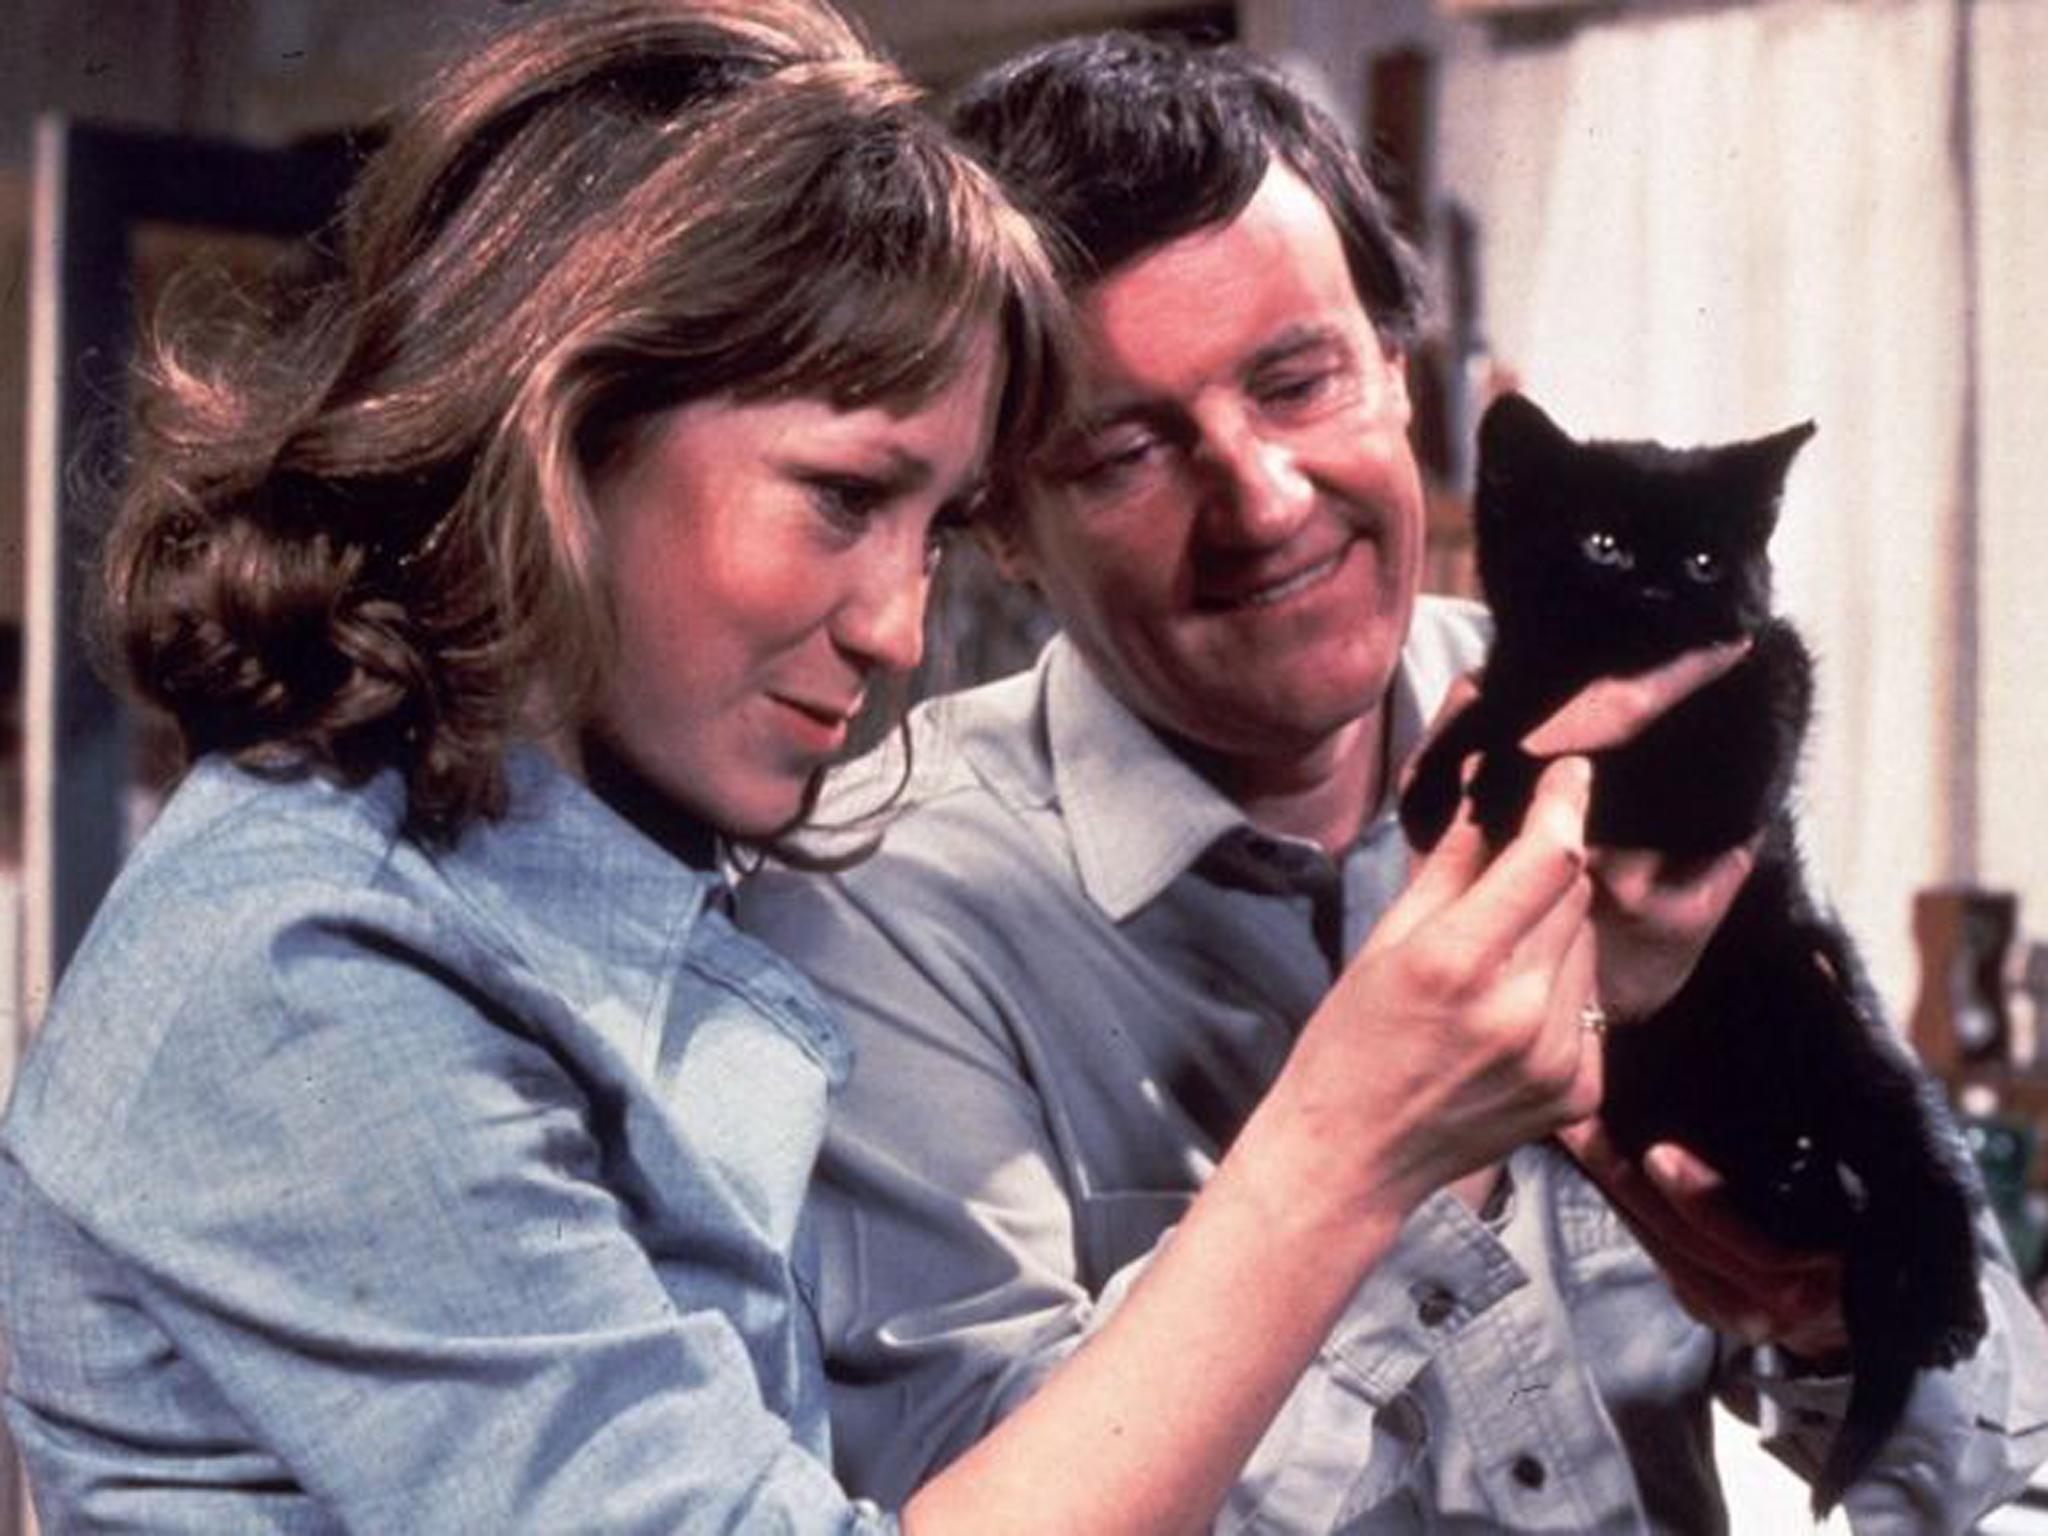 Larbey is best-known for 1970s sitcom, The Good Life, starring Felicity Kendal, who played Barbara, and Richard Briers, known to viewers as Tom